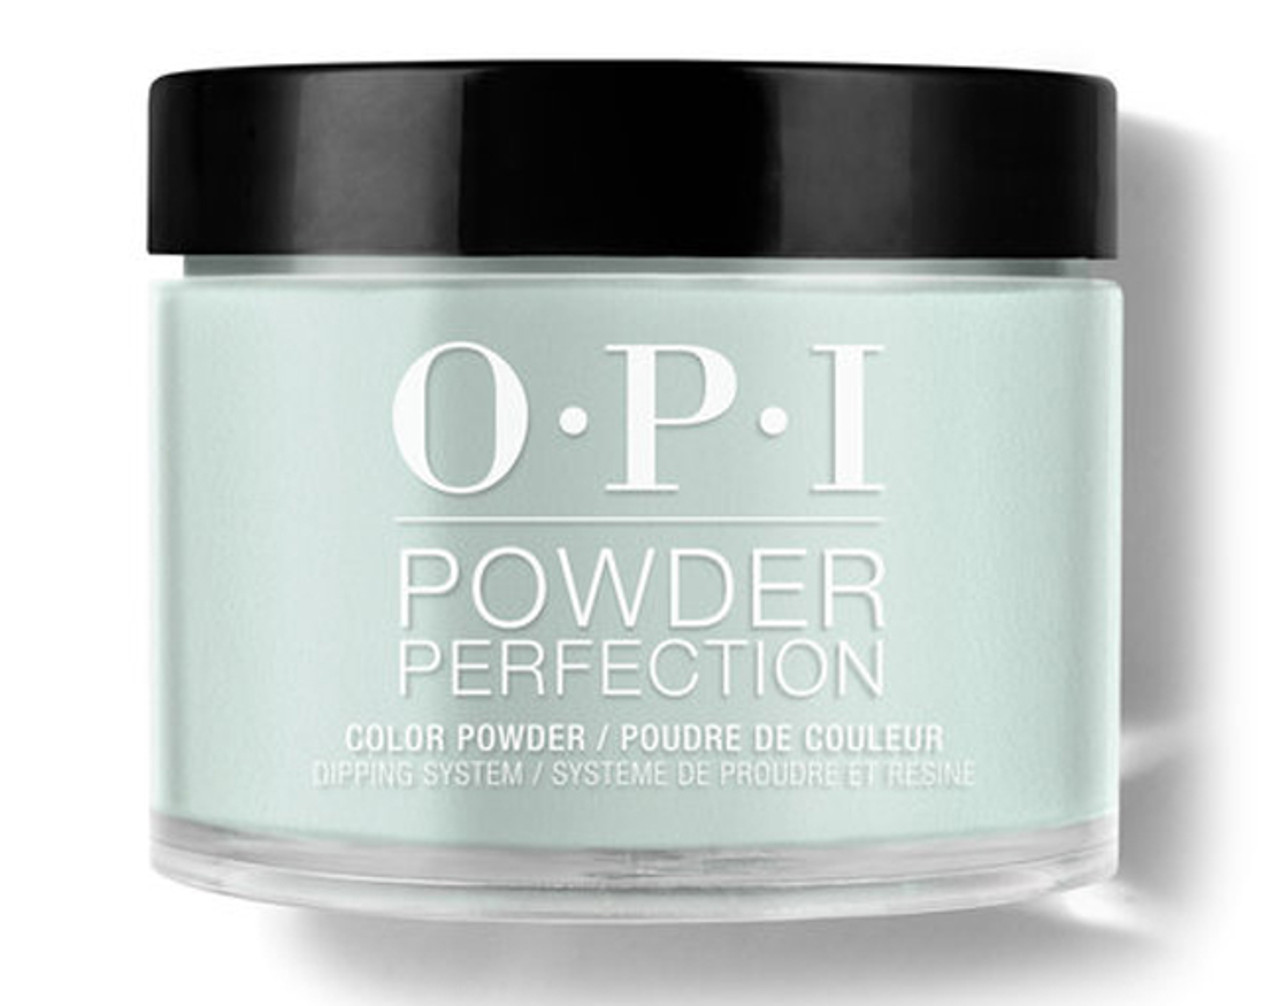 OPI Dipping Powder Perfection Verde Nice to Meet You - 1.5 oz / 43 G